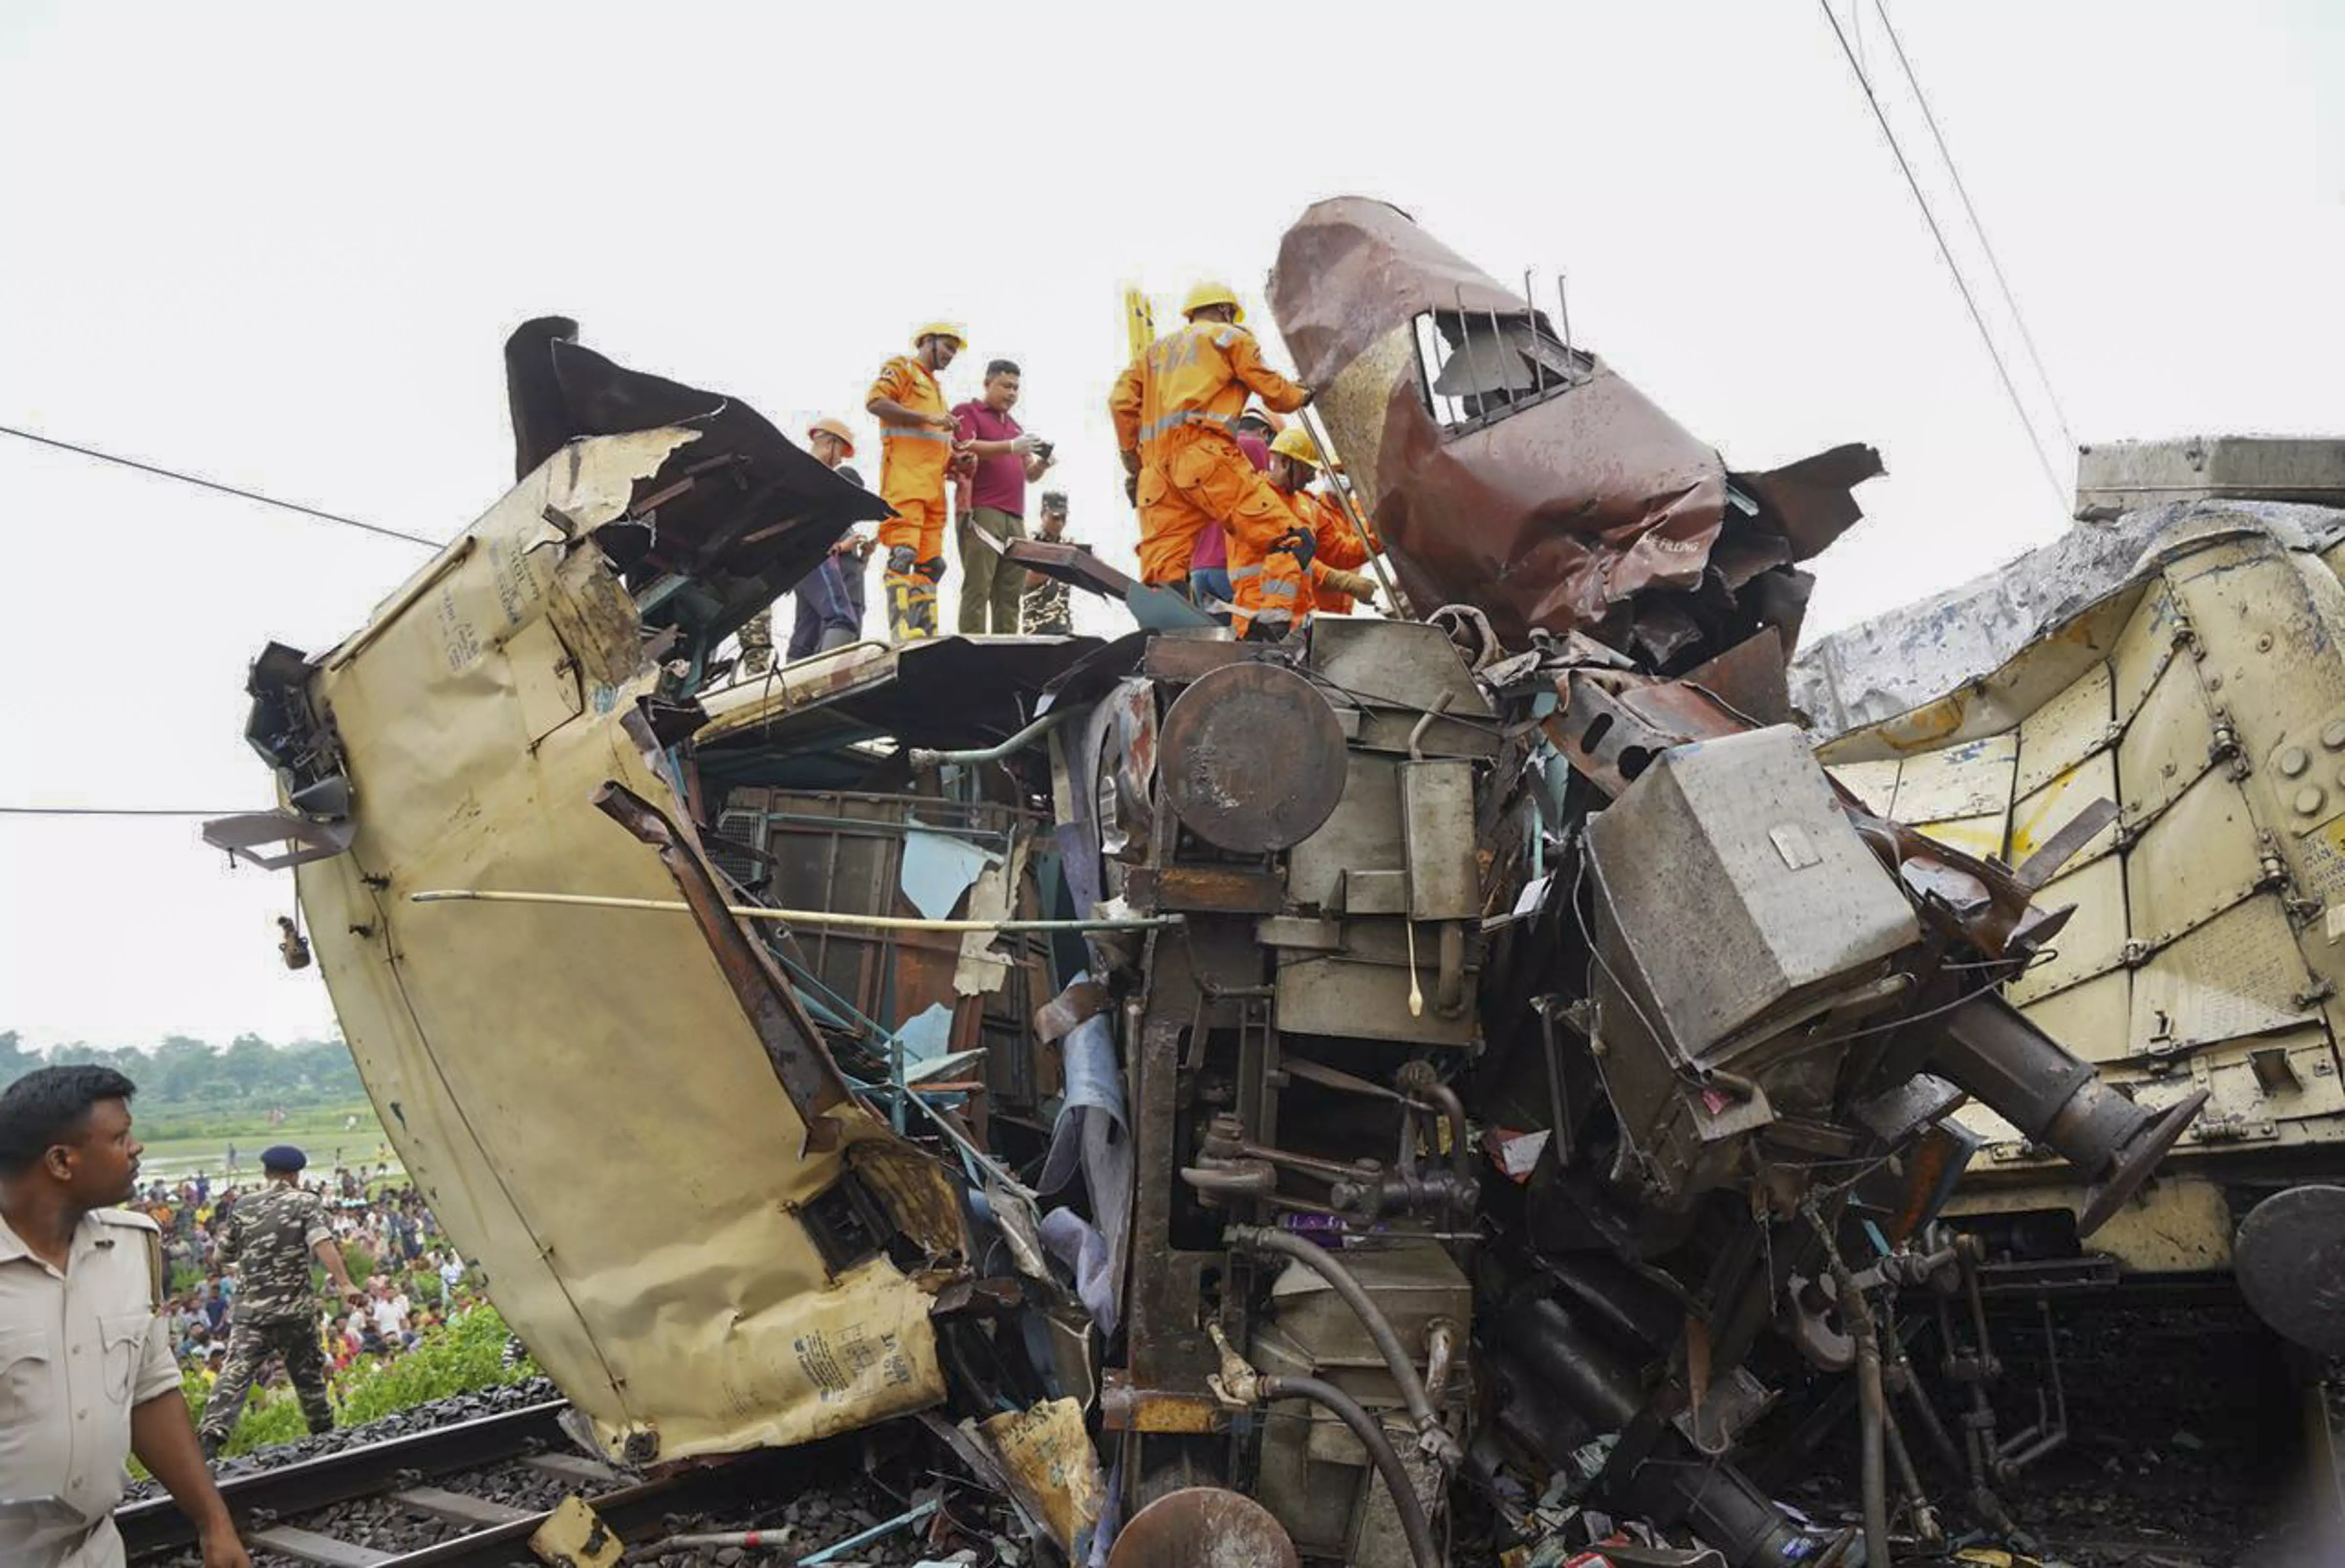 Kanchanjunga accident: 9 dead; ‘goods train driver had clearance to cross red signals’